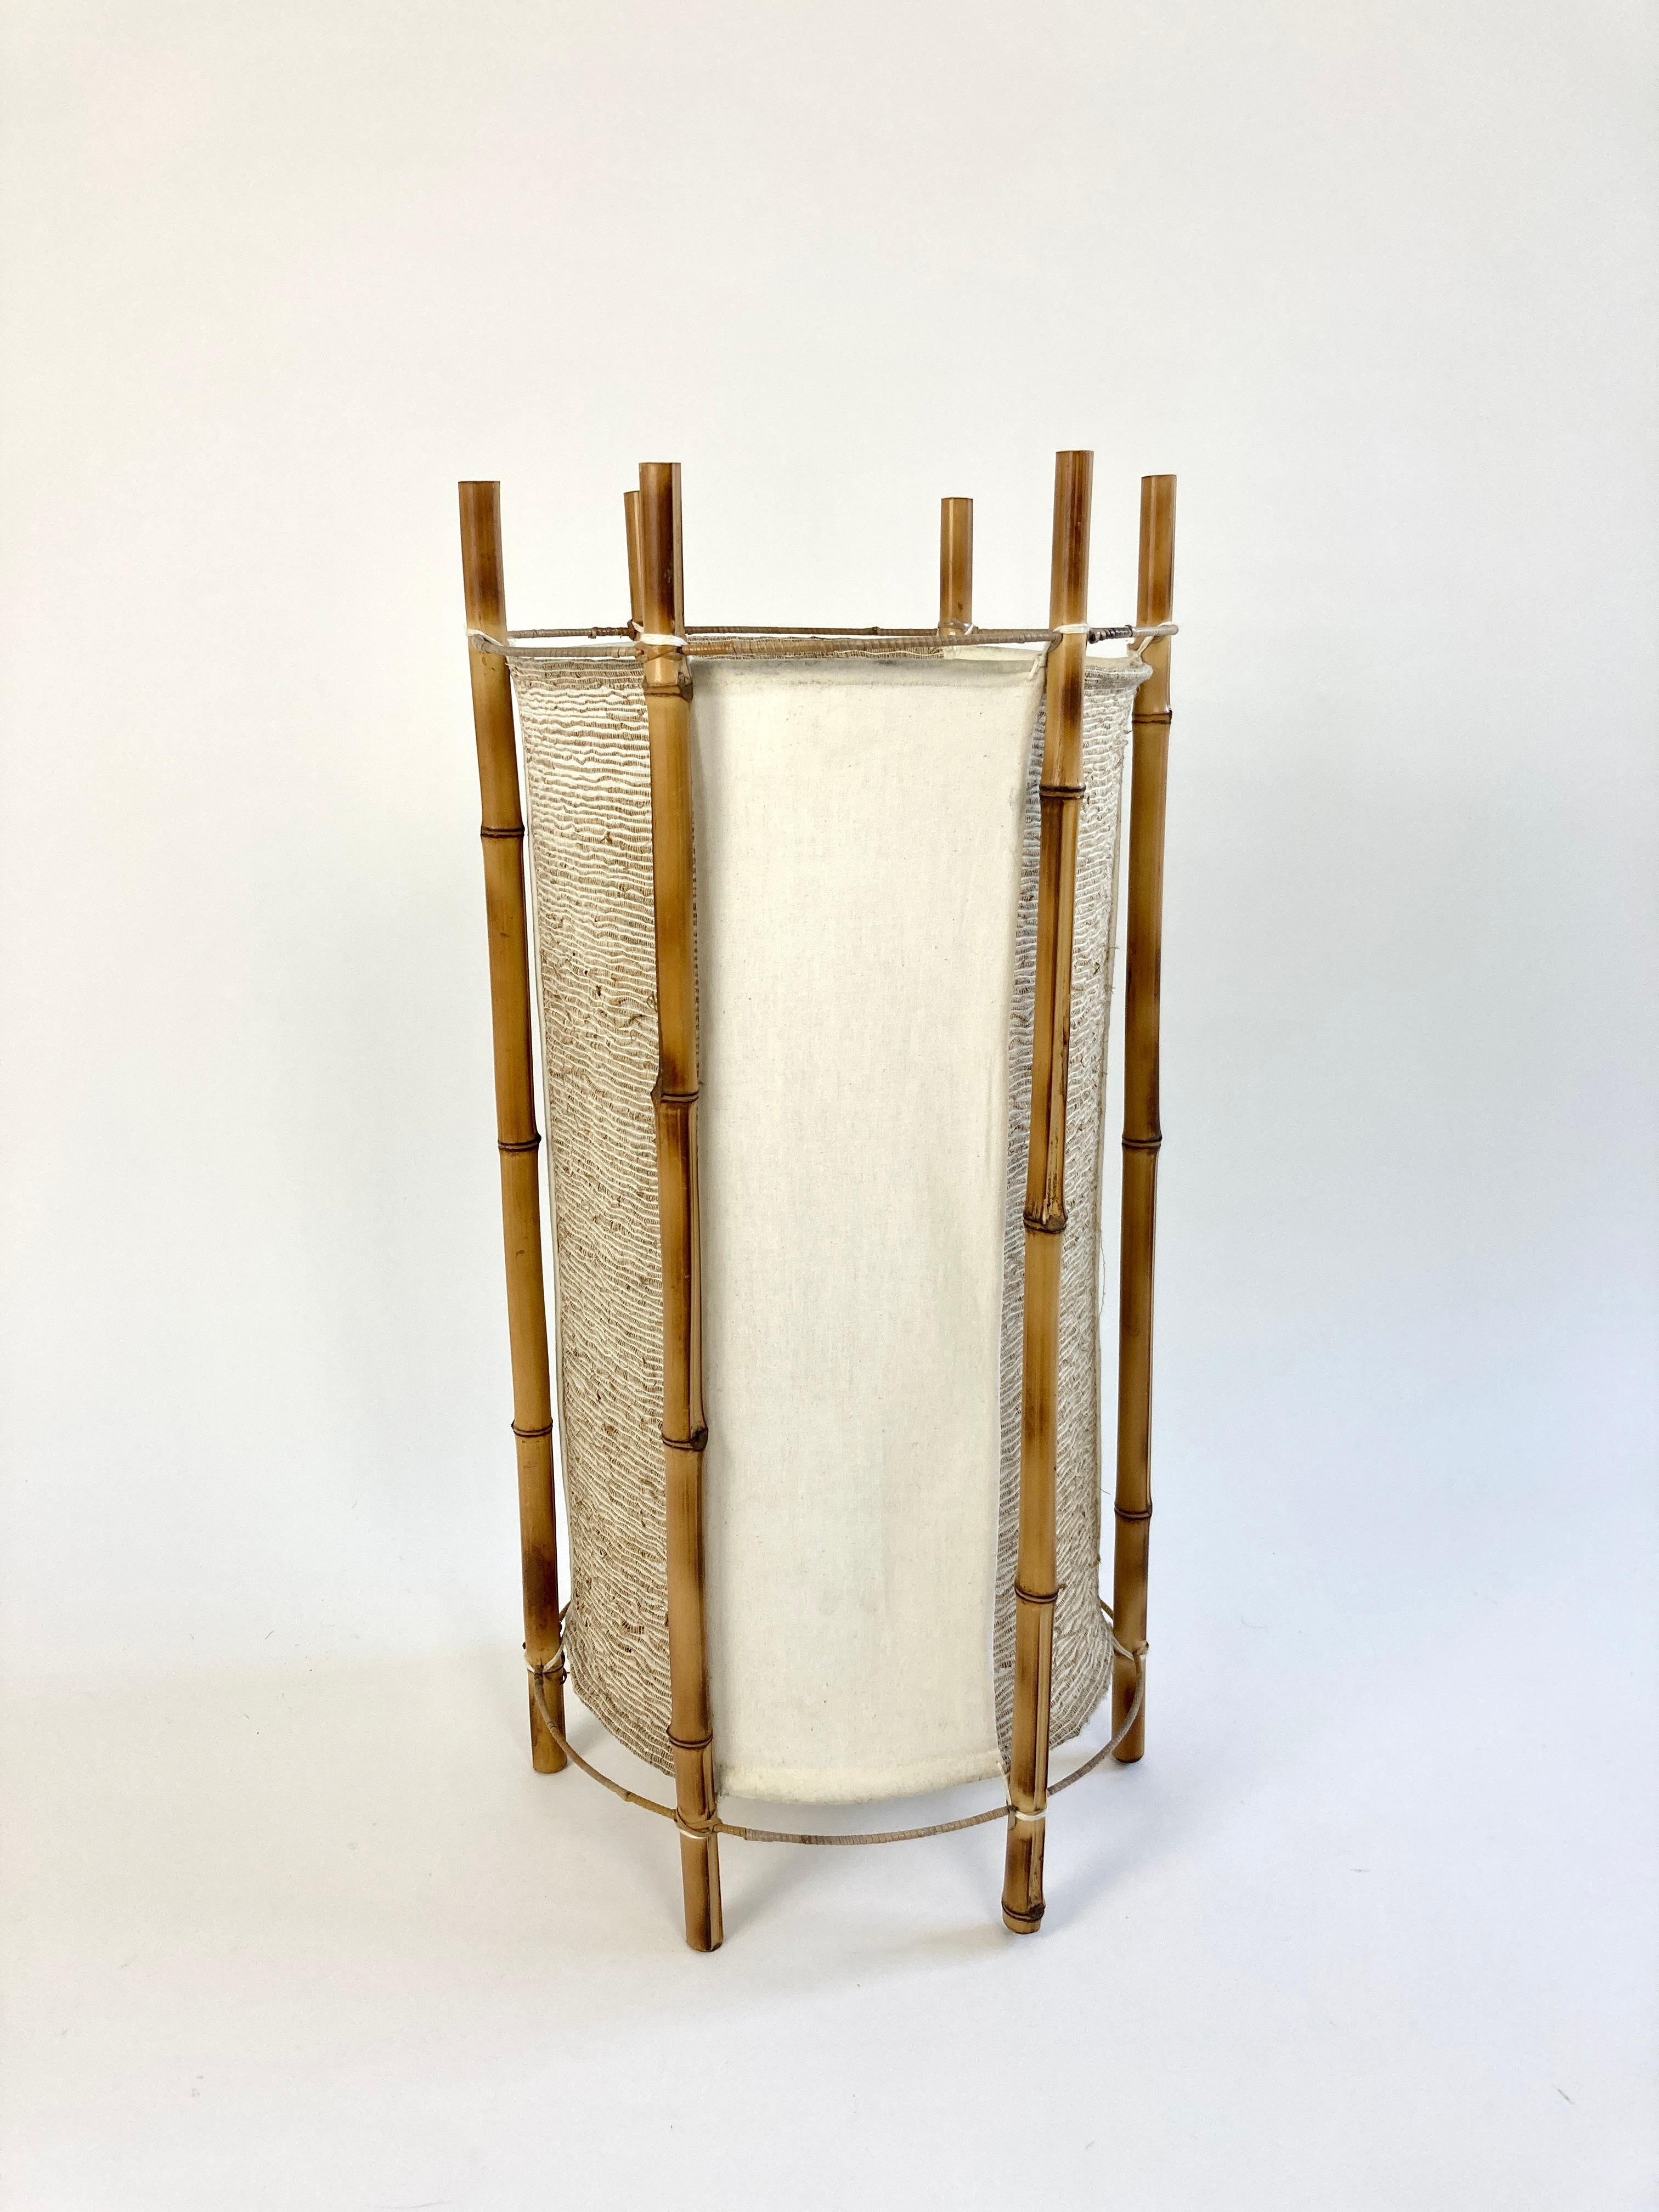 Vintage bamboo table lamp from France, circa 1960, Louis Sognot attributed.

A large table lamp which could also be used a small floor lamp.

